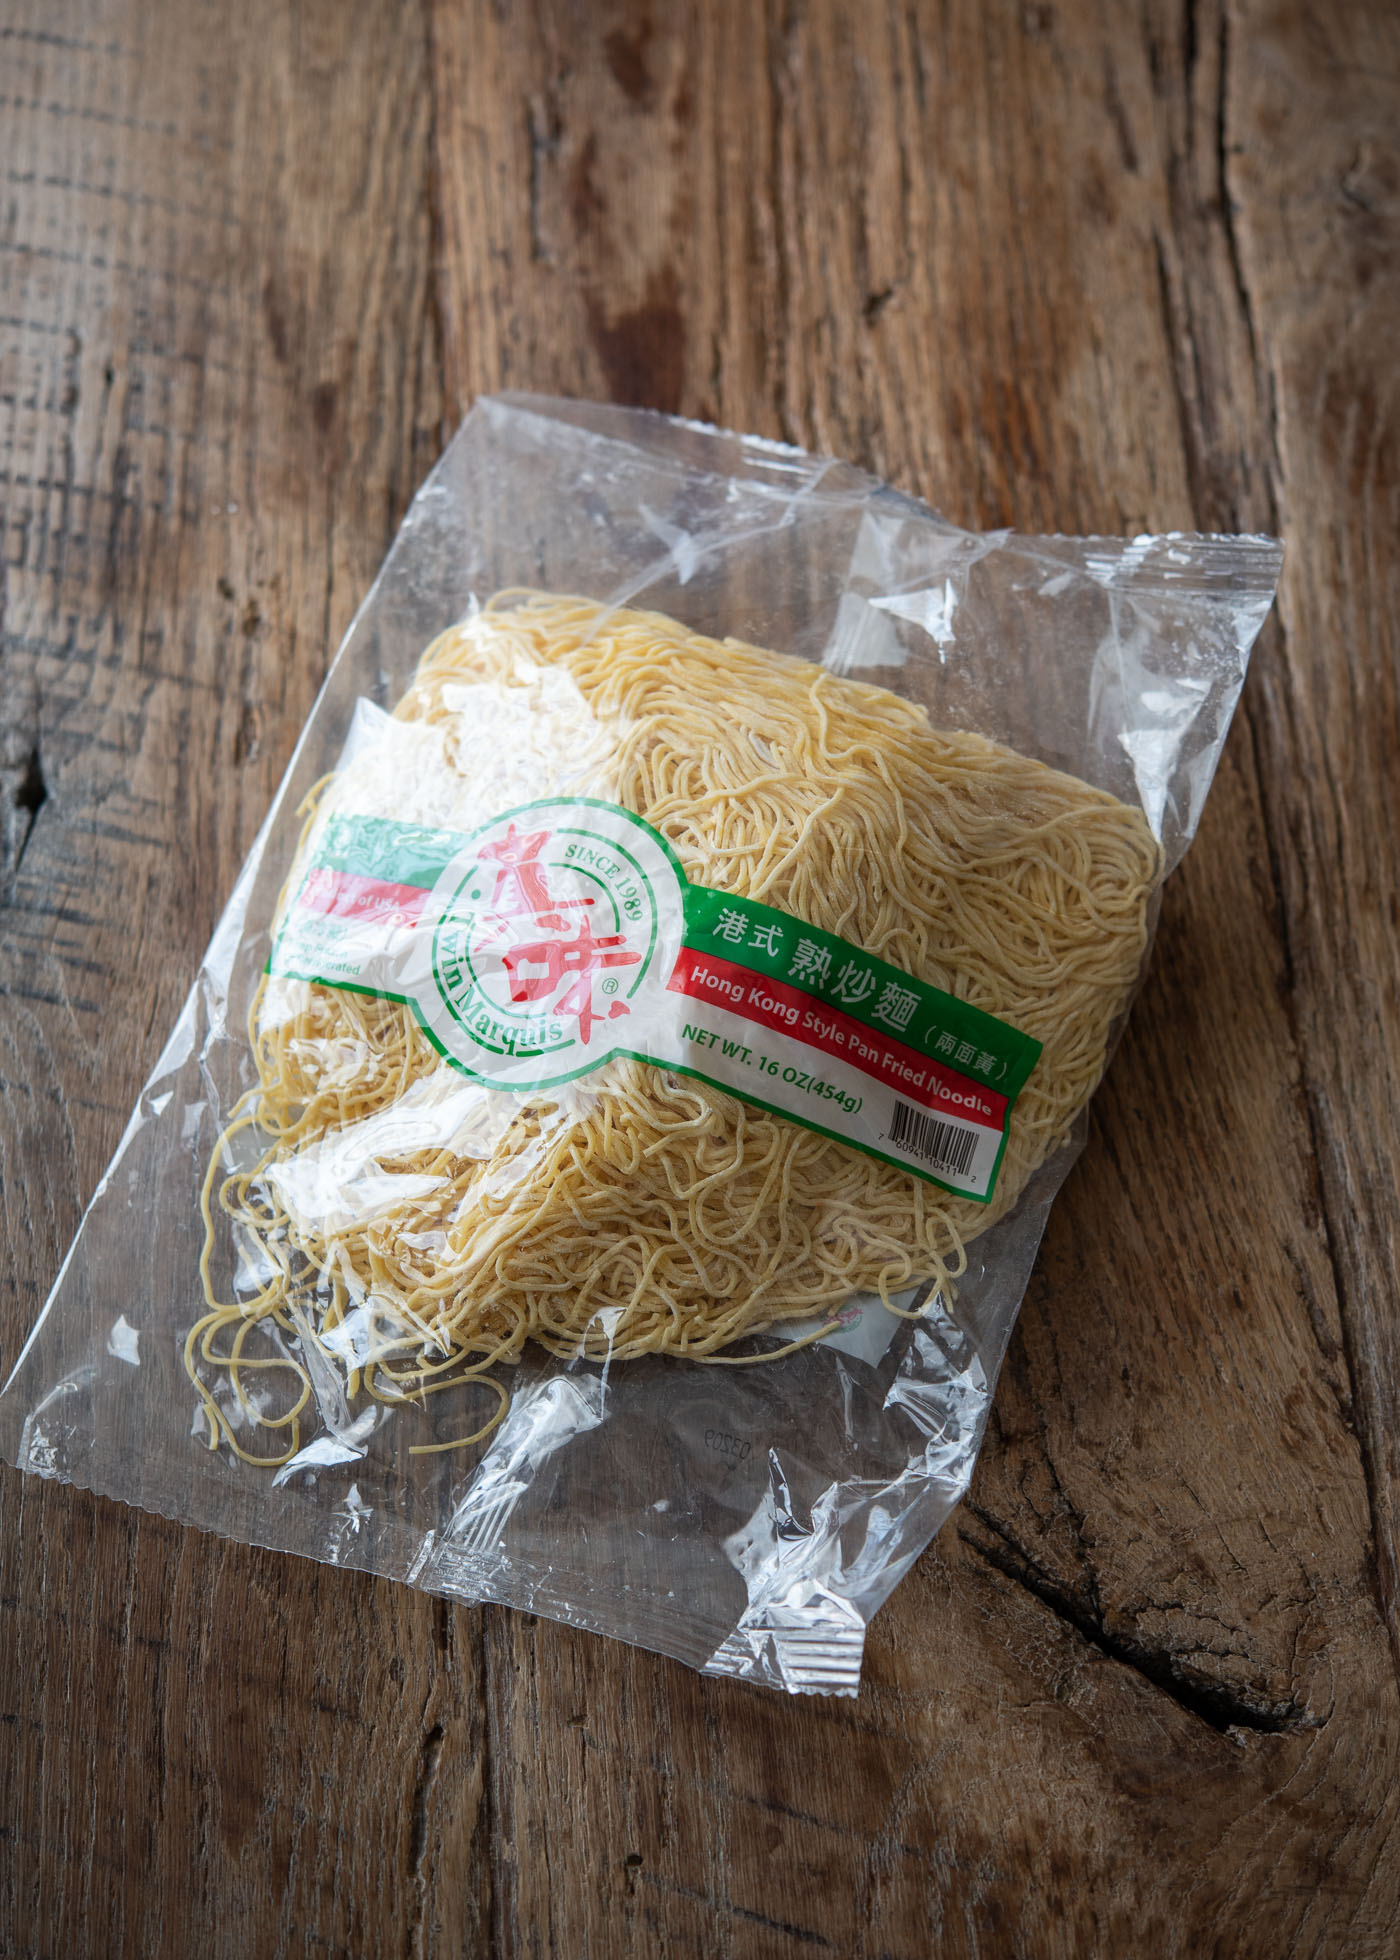 A package of fresh Hong Kong pan fried noodles is placed on a counter.